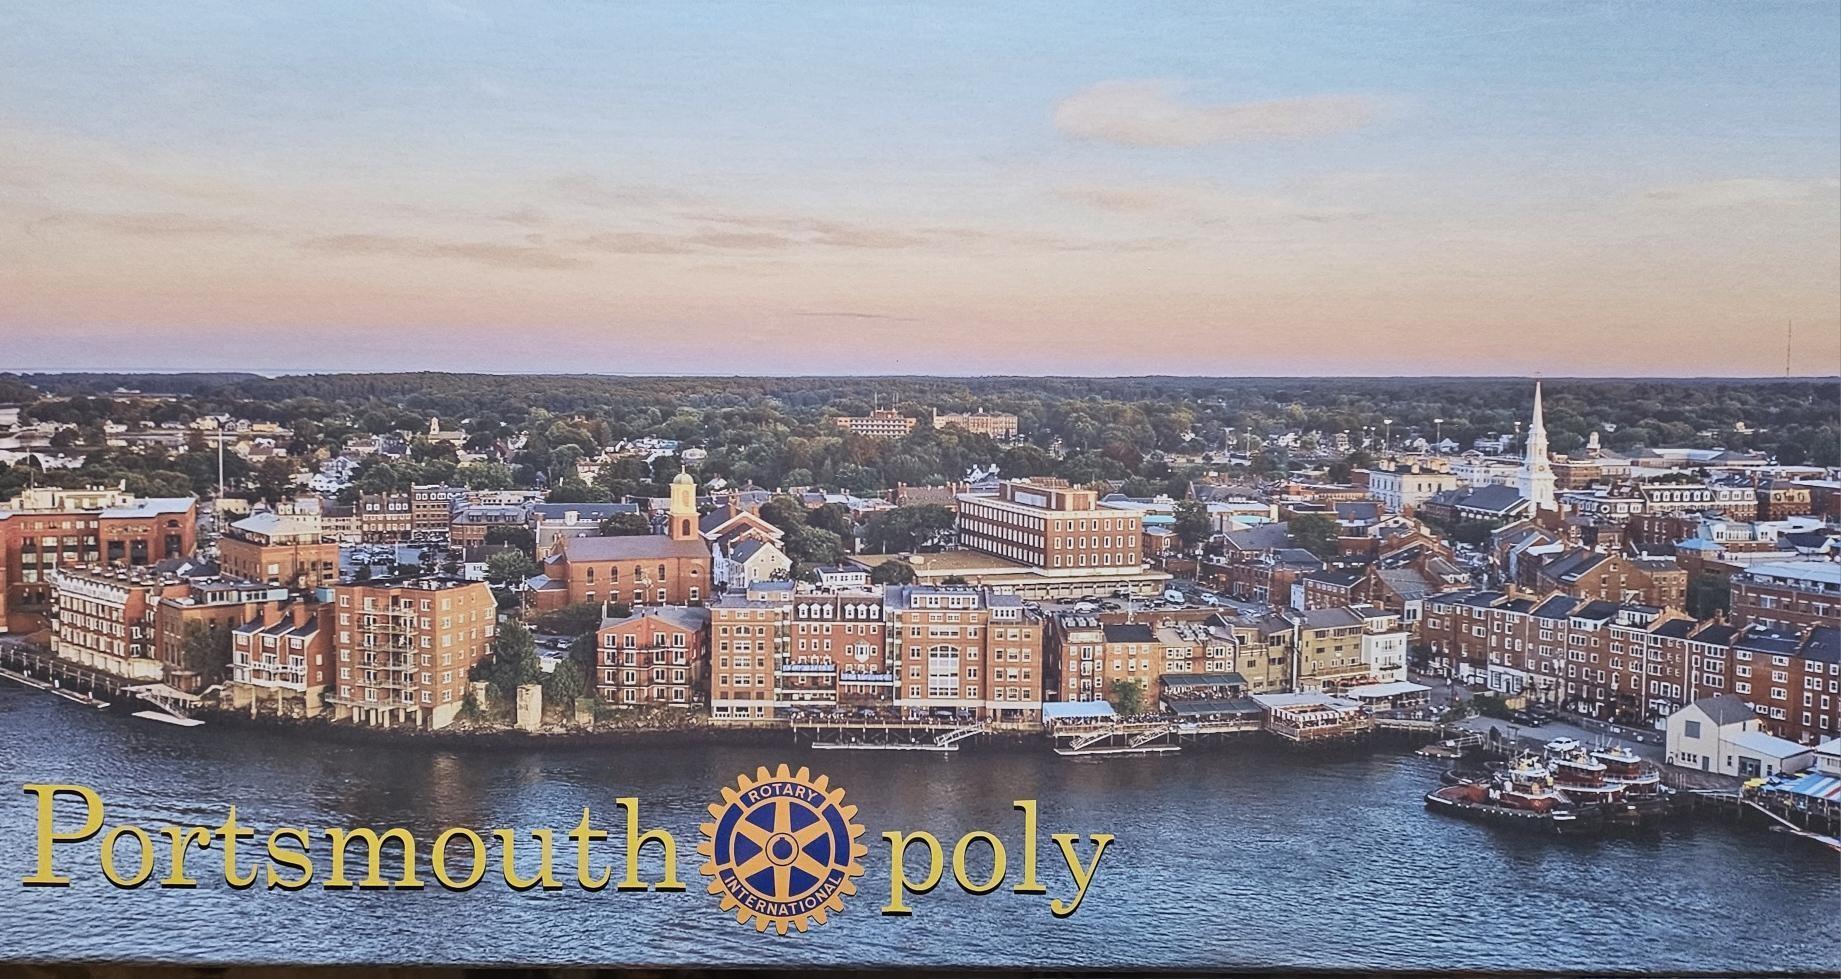 Limited edition Rotary Portsmouth-opoly game – PortsmouthHistoryShop